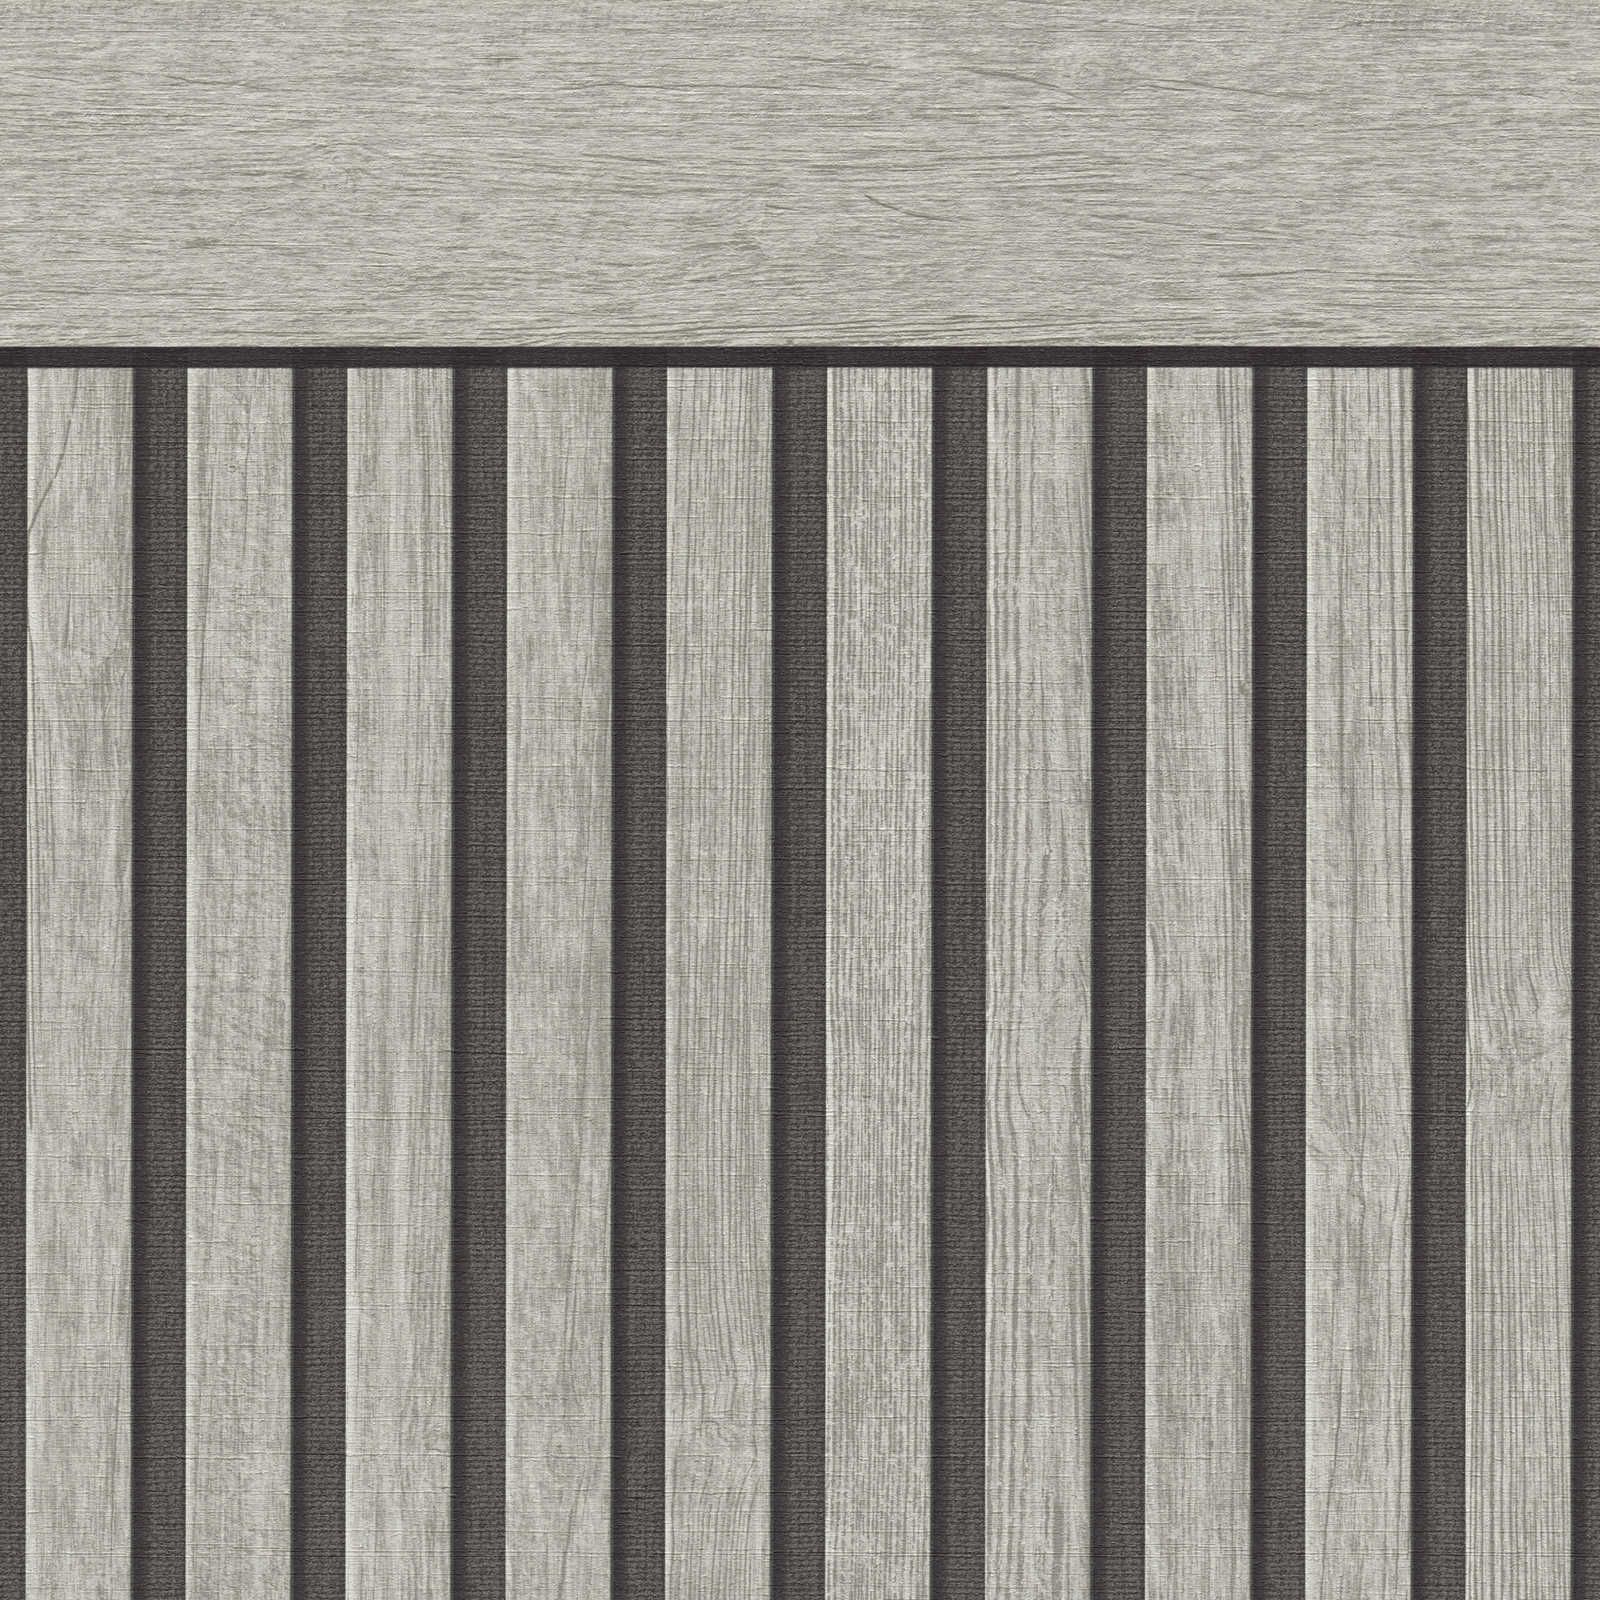         Non-woven wall panel with realistic acoustic panel pattern made of wood - grey
    